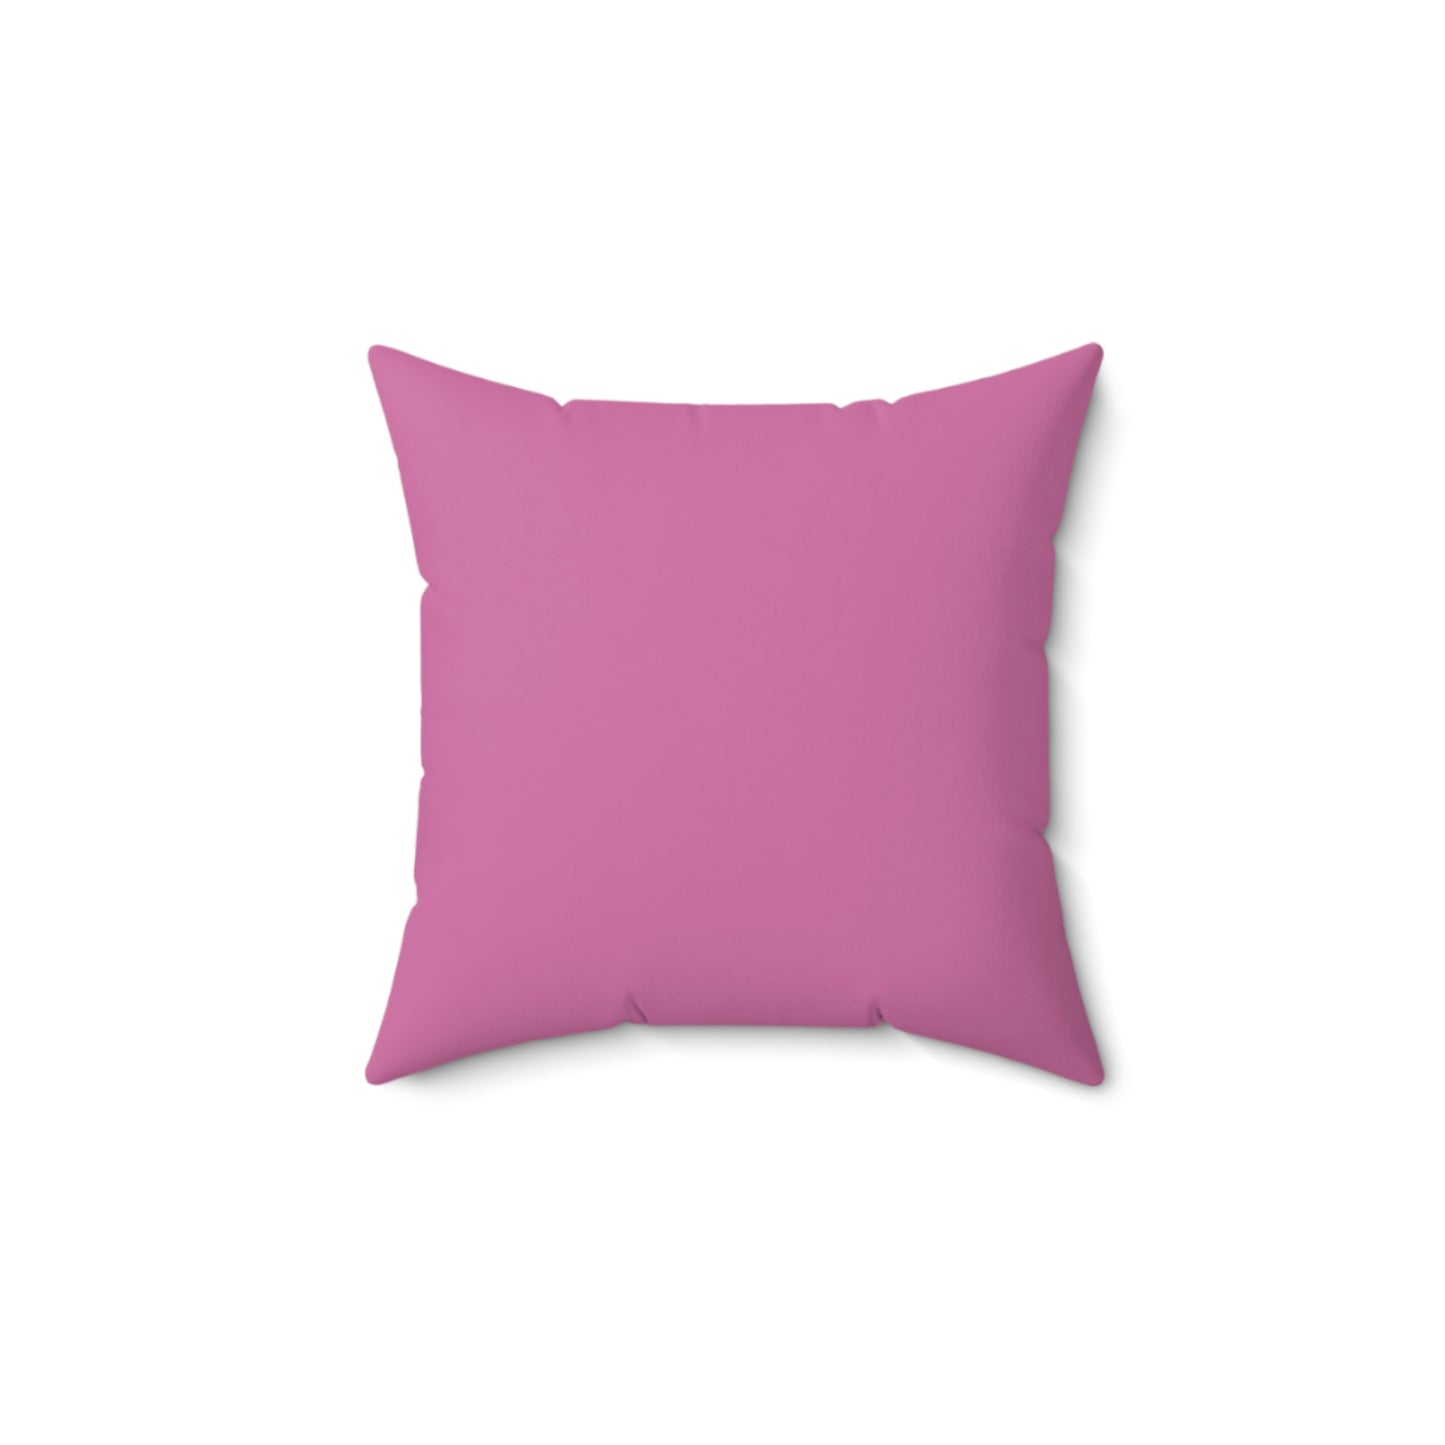 Spun Polyester Square Pillow Case “Knowledge Powered by Google on Light Pink”